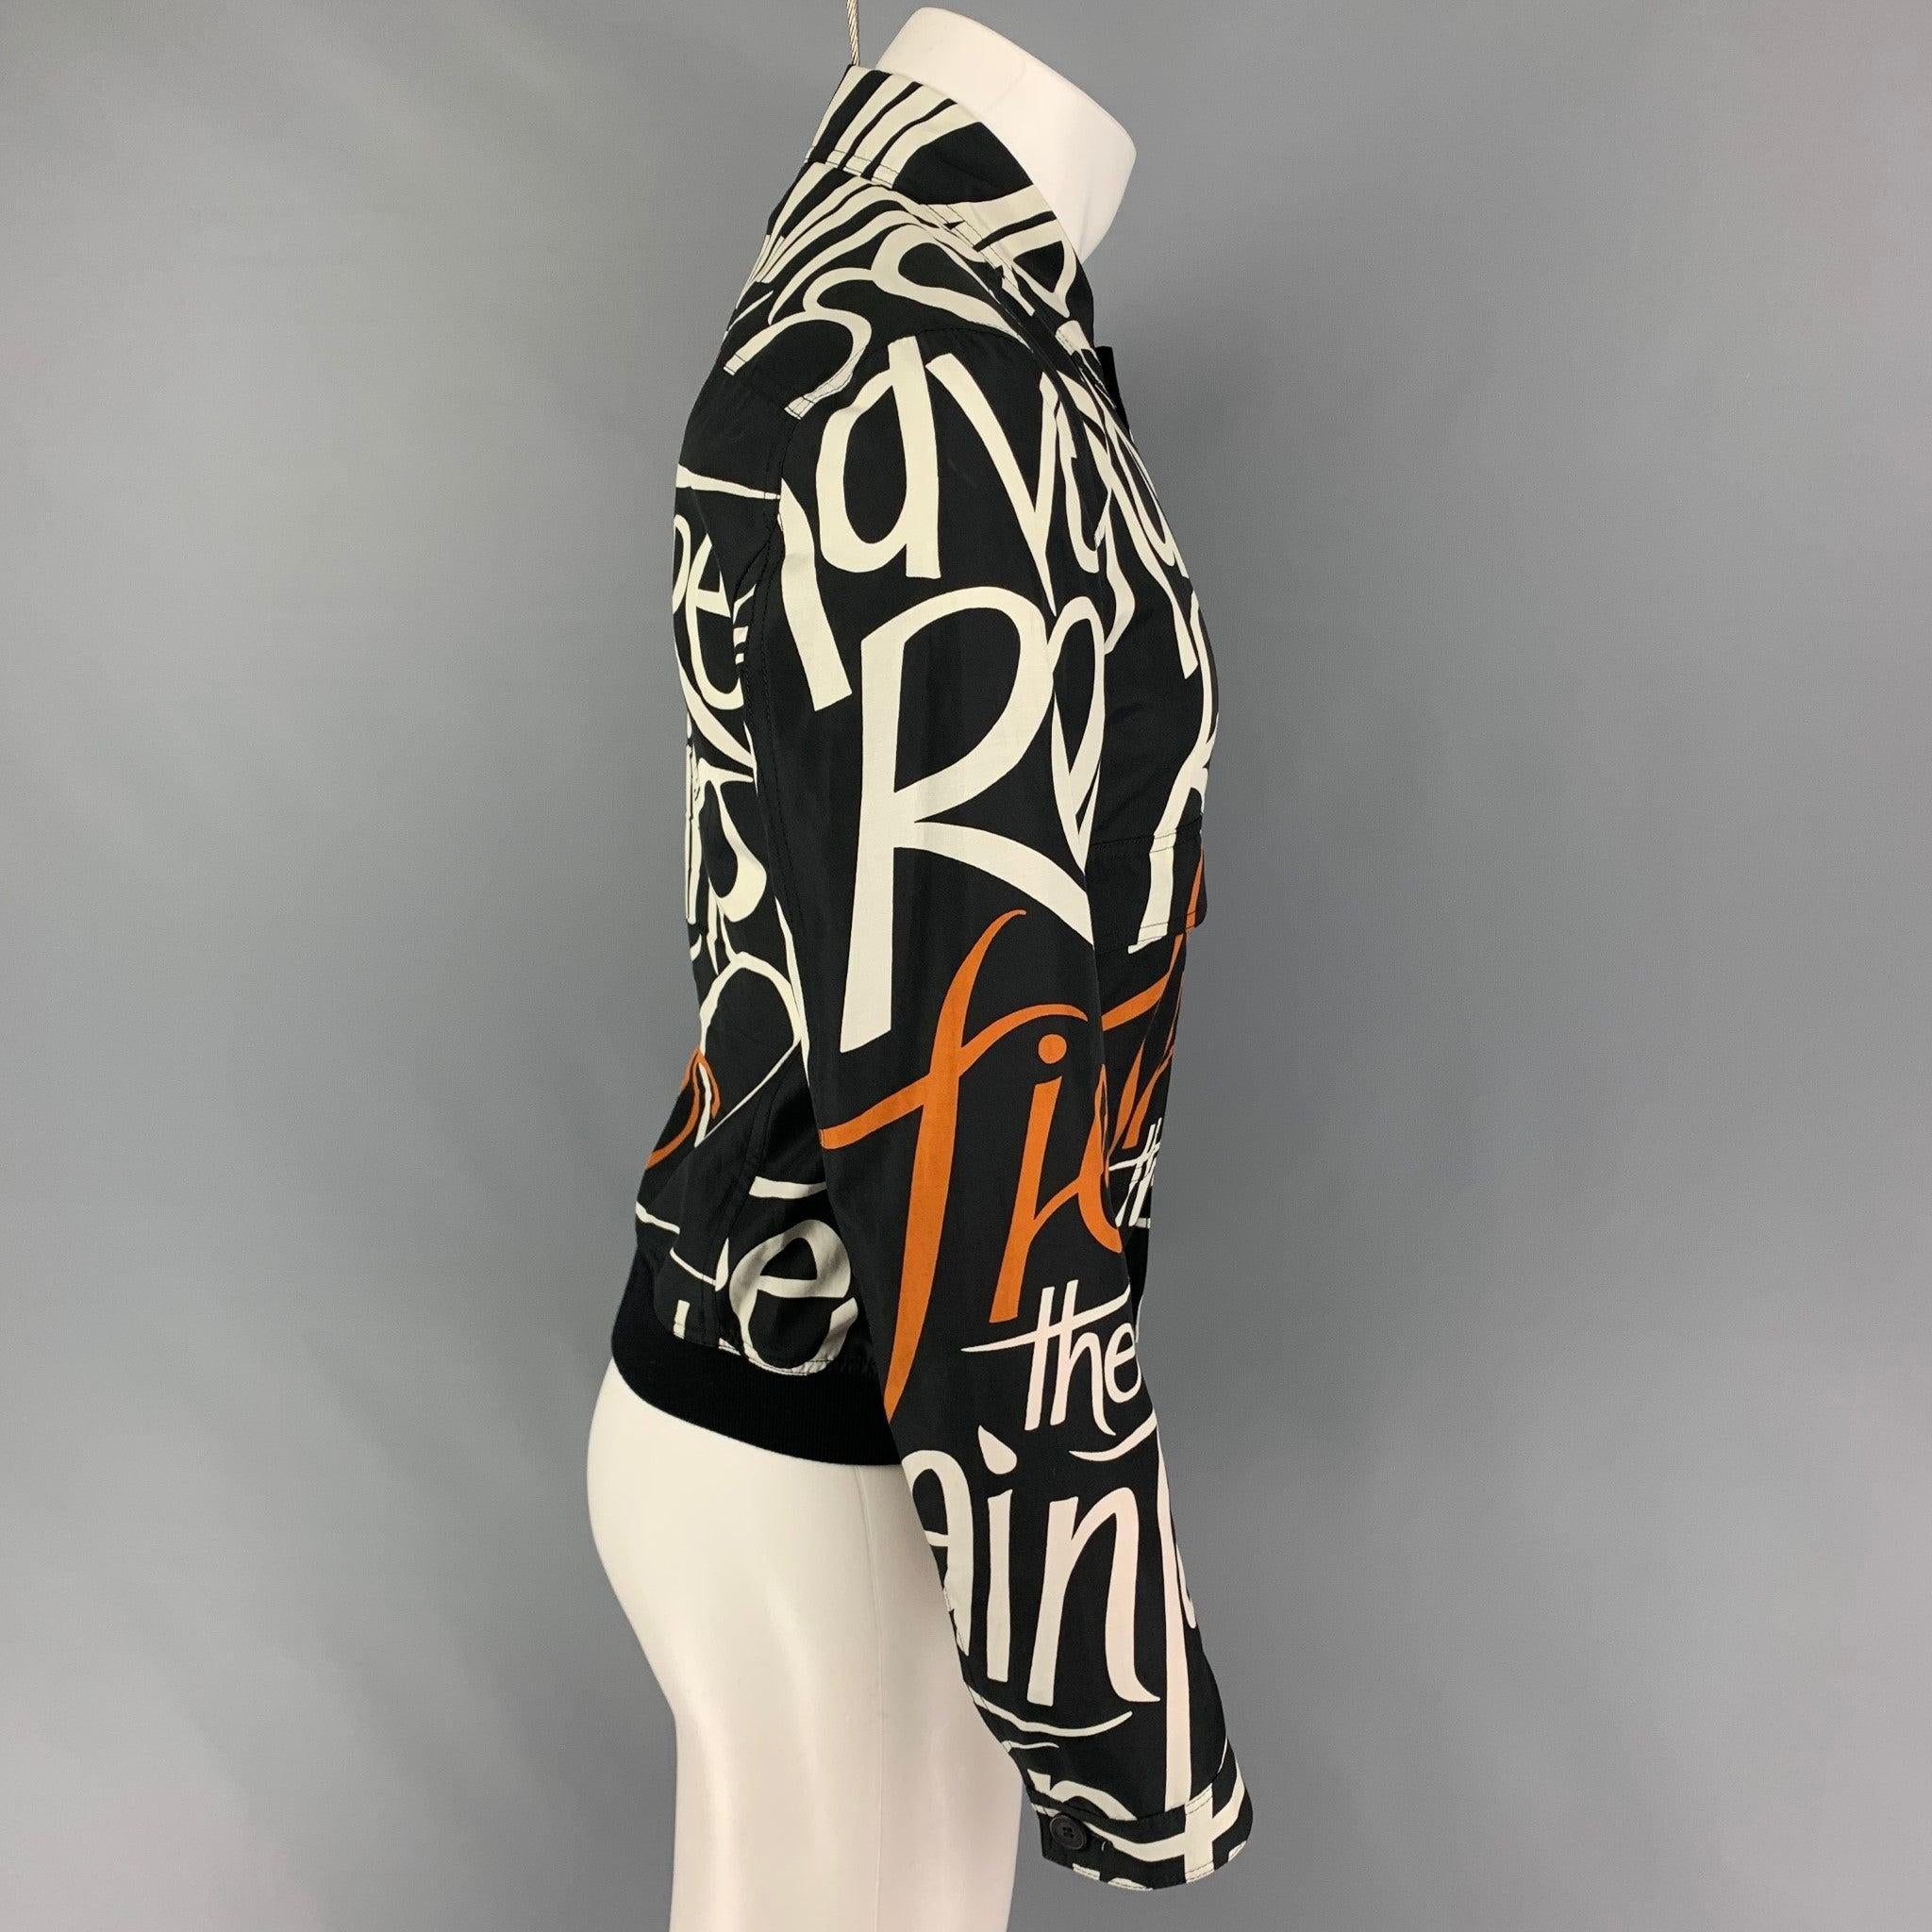 BURBERRY PRORSUM by Christopher Bailey jacket comes in a black & copper silk blend with a graphic print throughout featuring a ribbed hem, flap pockets, spread collar, and a full zip up closure. Made in Italy.
Very Good Pre-Owned Condition. Light